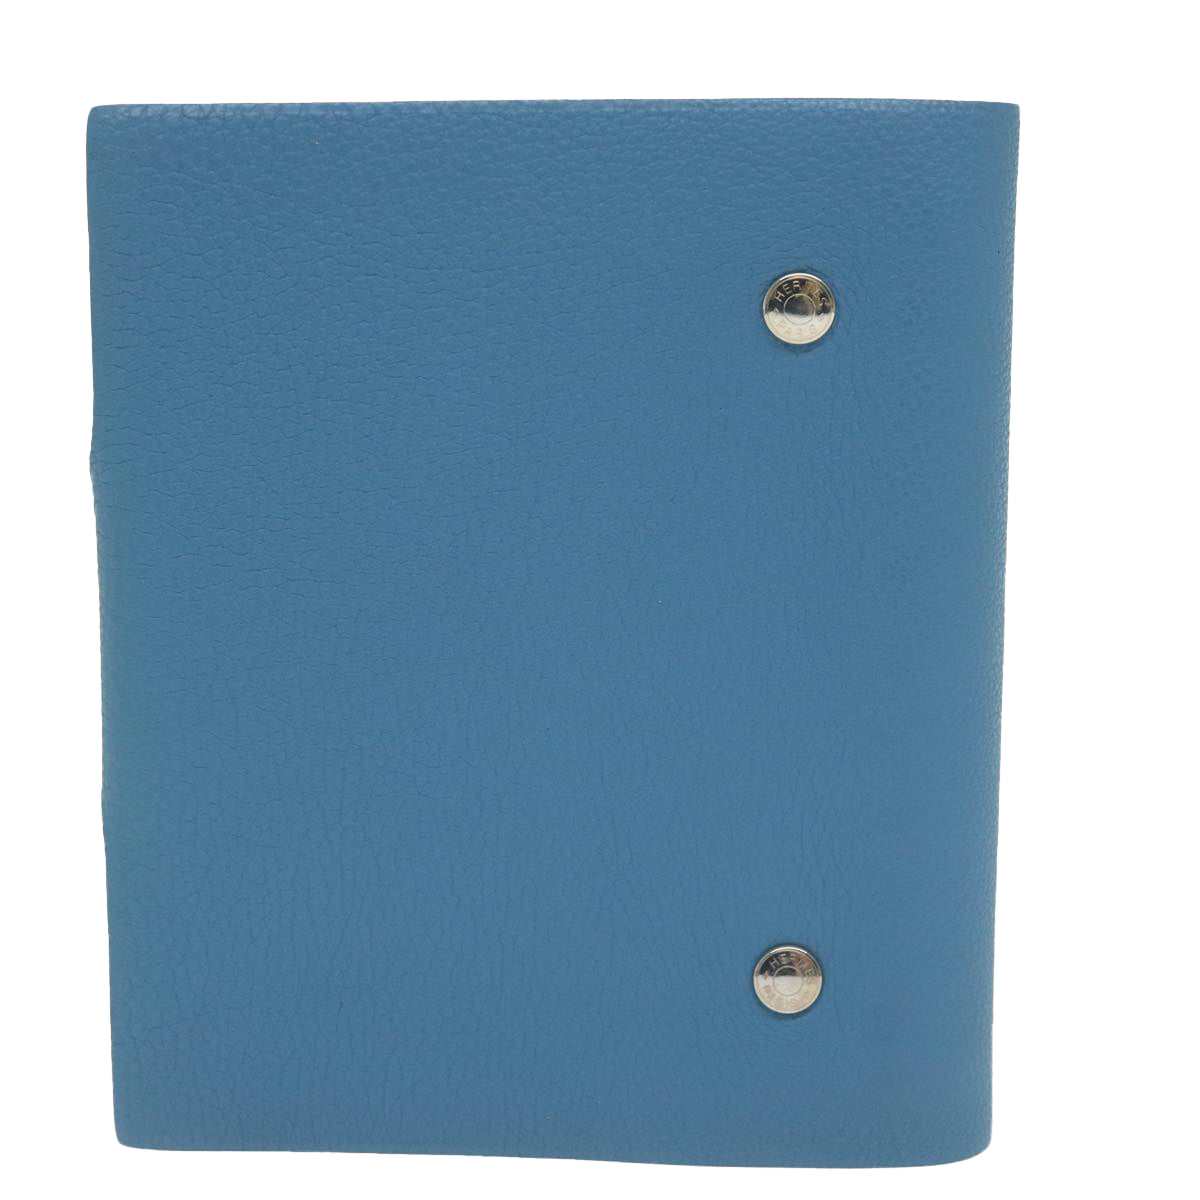 HERMES Yuris PM Day Planner Cover Leather Blue Auth ar11070